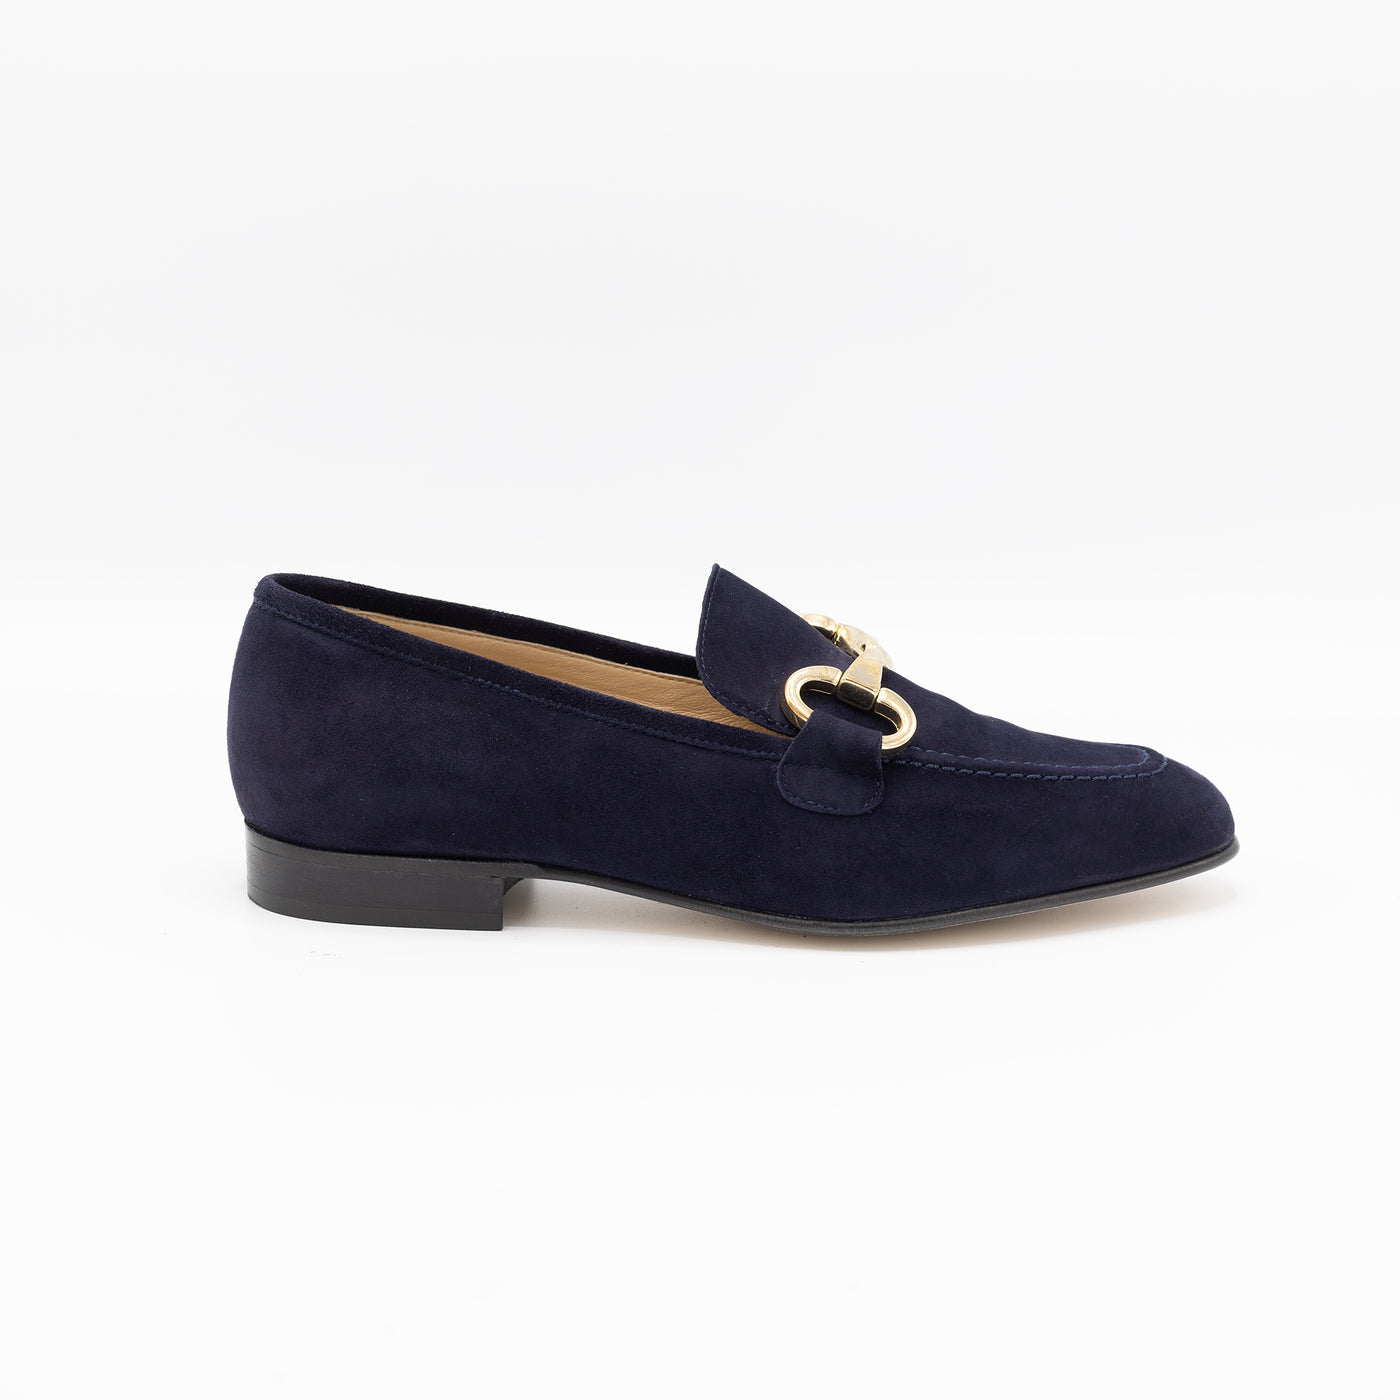 Classic horsebit loafer in navy suede. Set on leather soles and featuring a pale gold horsebit.